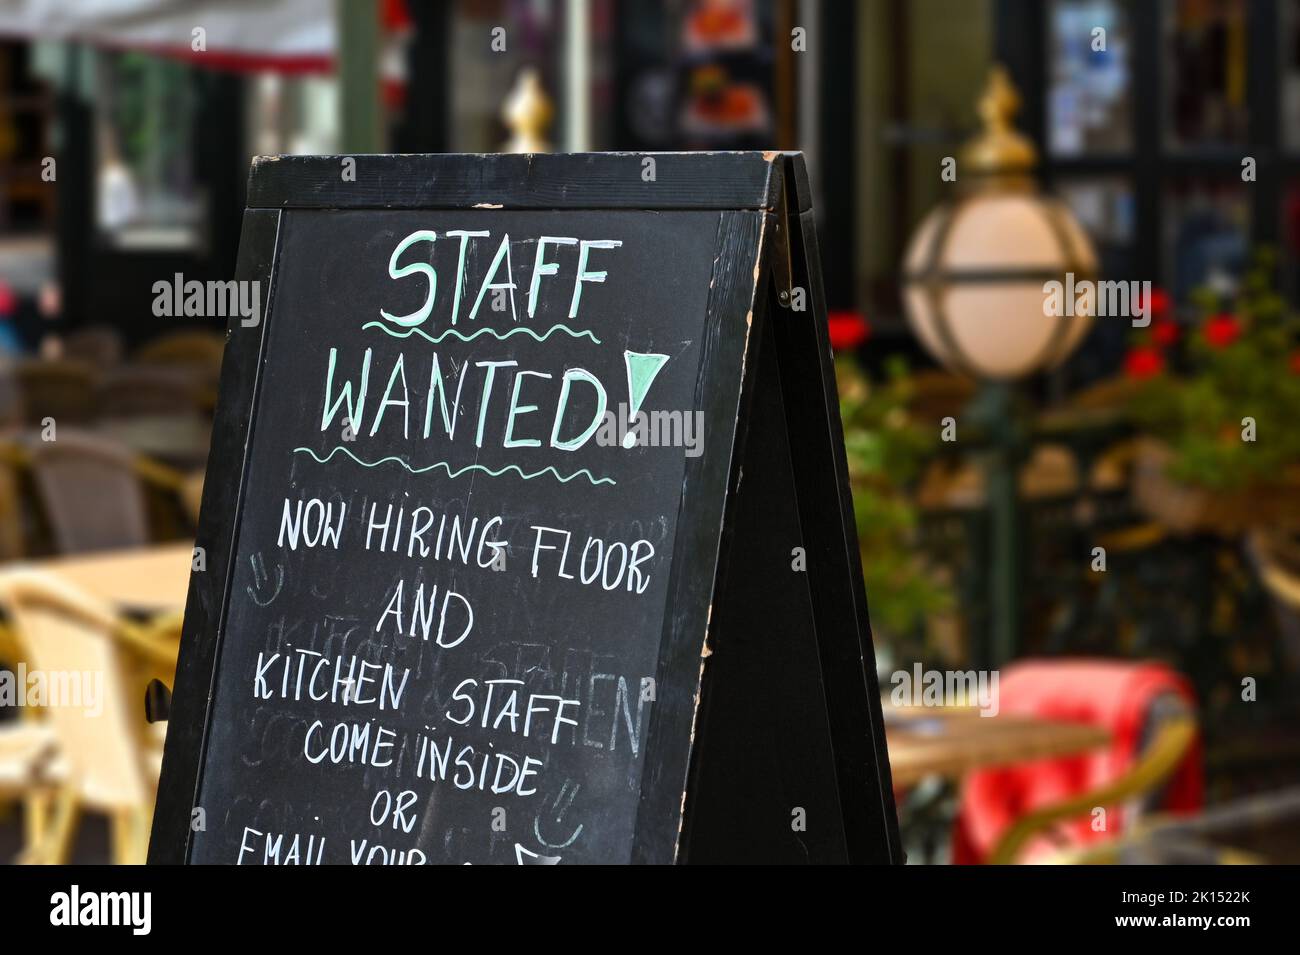 Staff wanted recruitment sign outside a restaurant in Europe Stock Photo